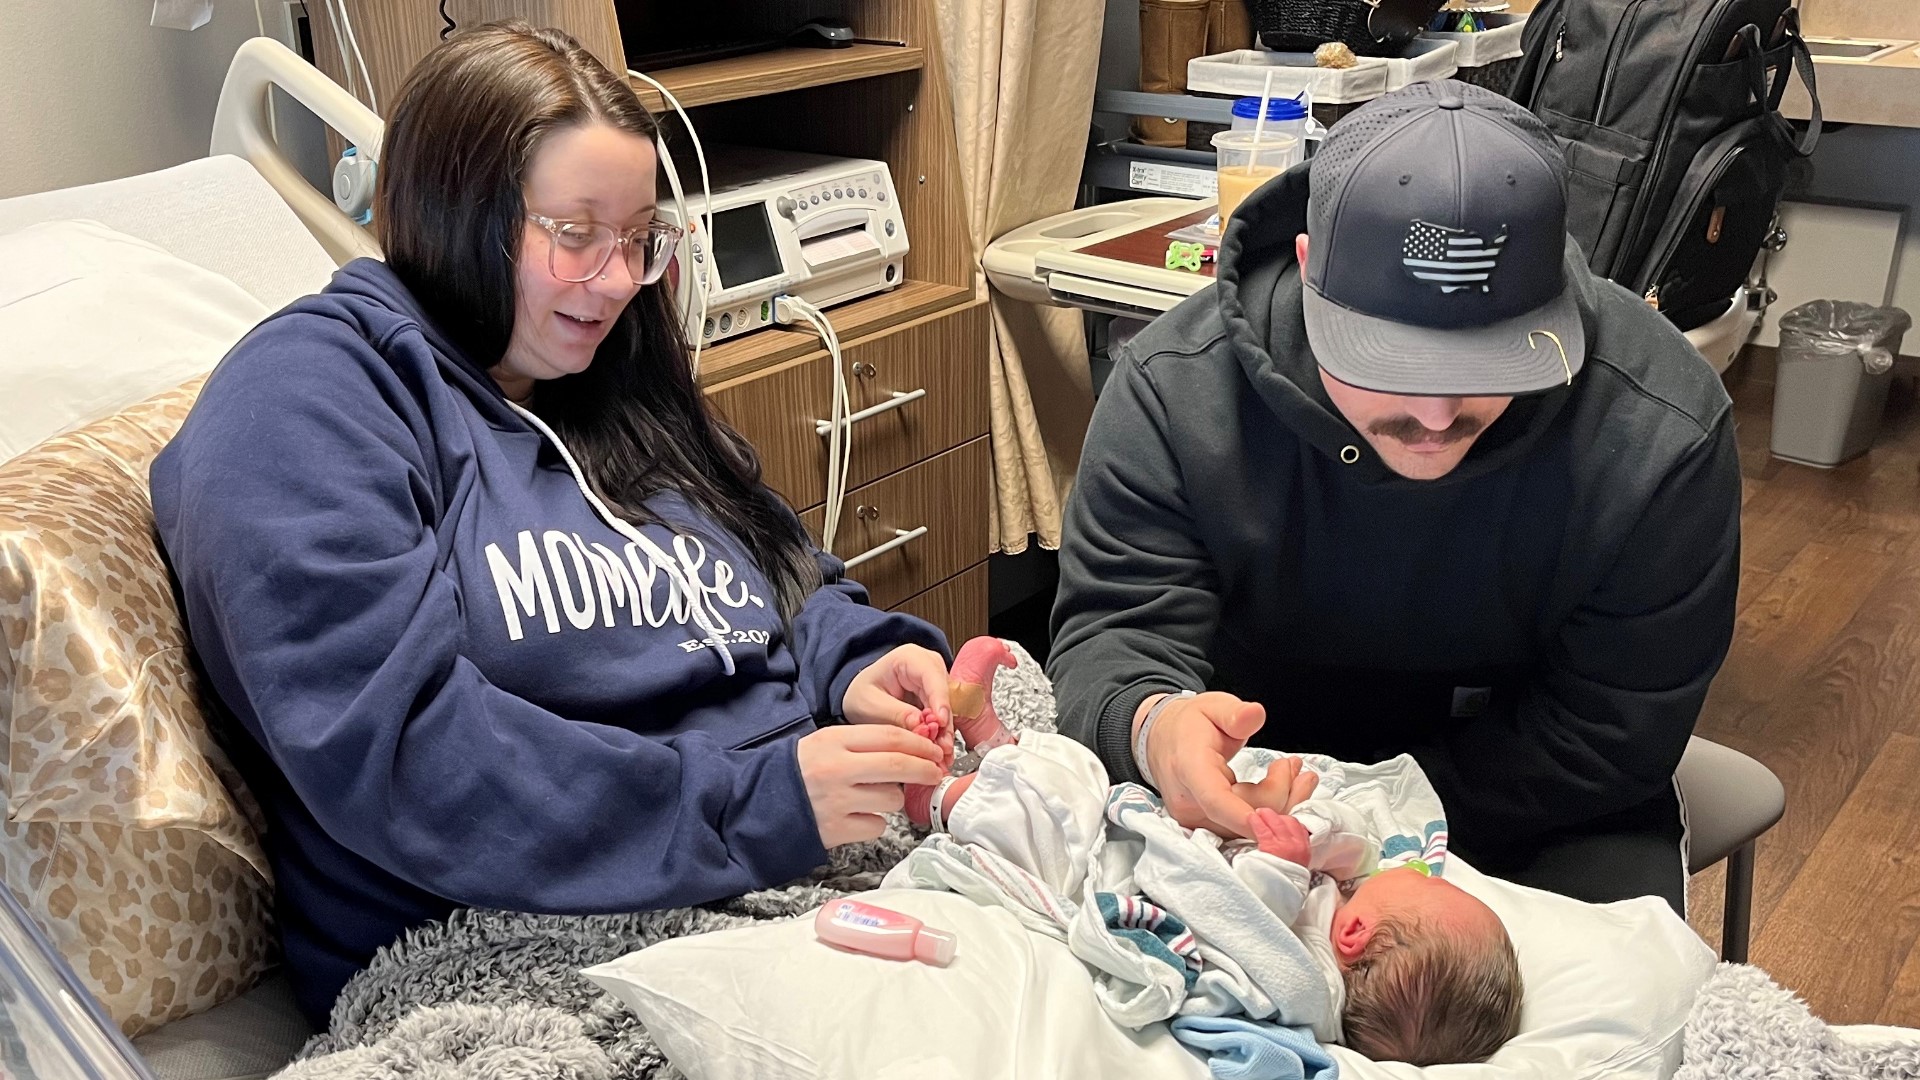 Abbi Zuber gave birth on her birthday in the same room she was born in, with the same doctor.